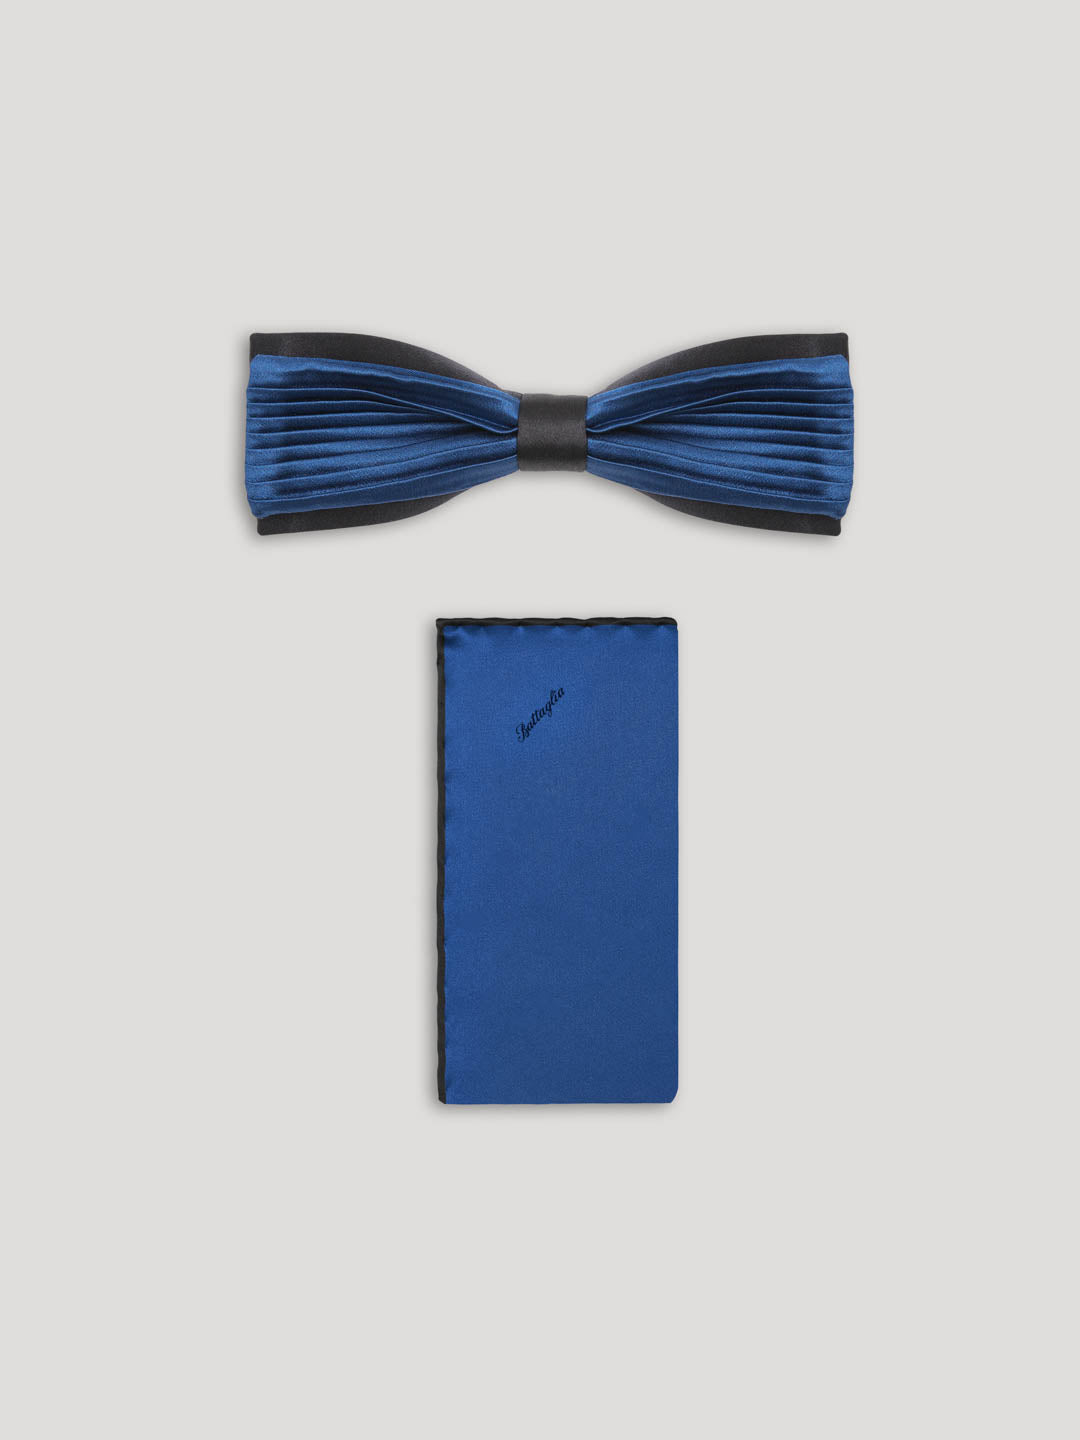 Blue pleated silk bow tie with matching handkerchief.